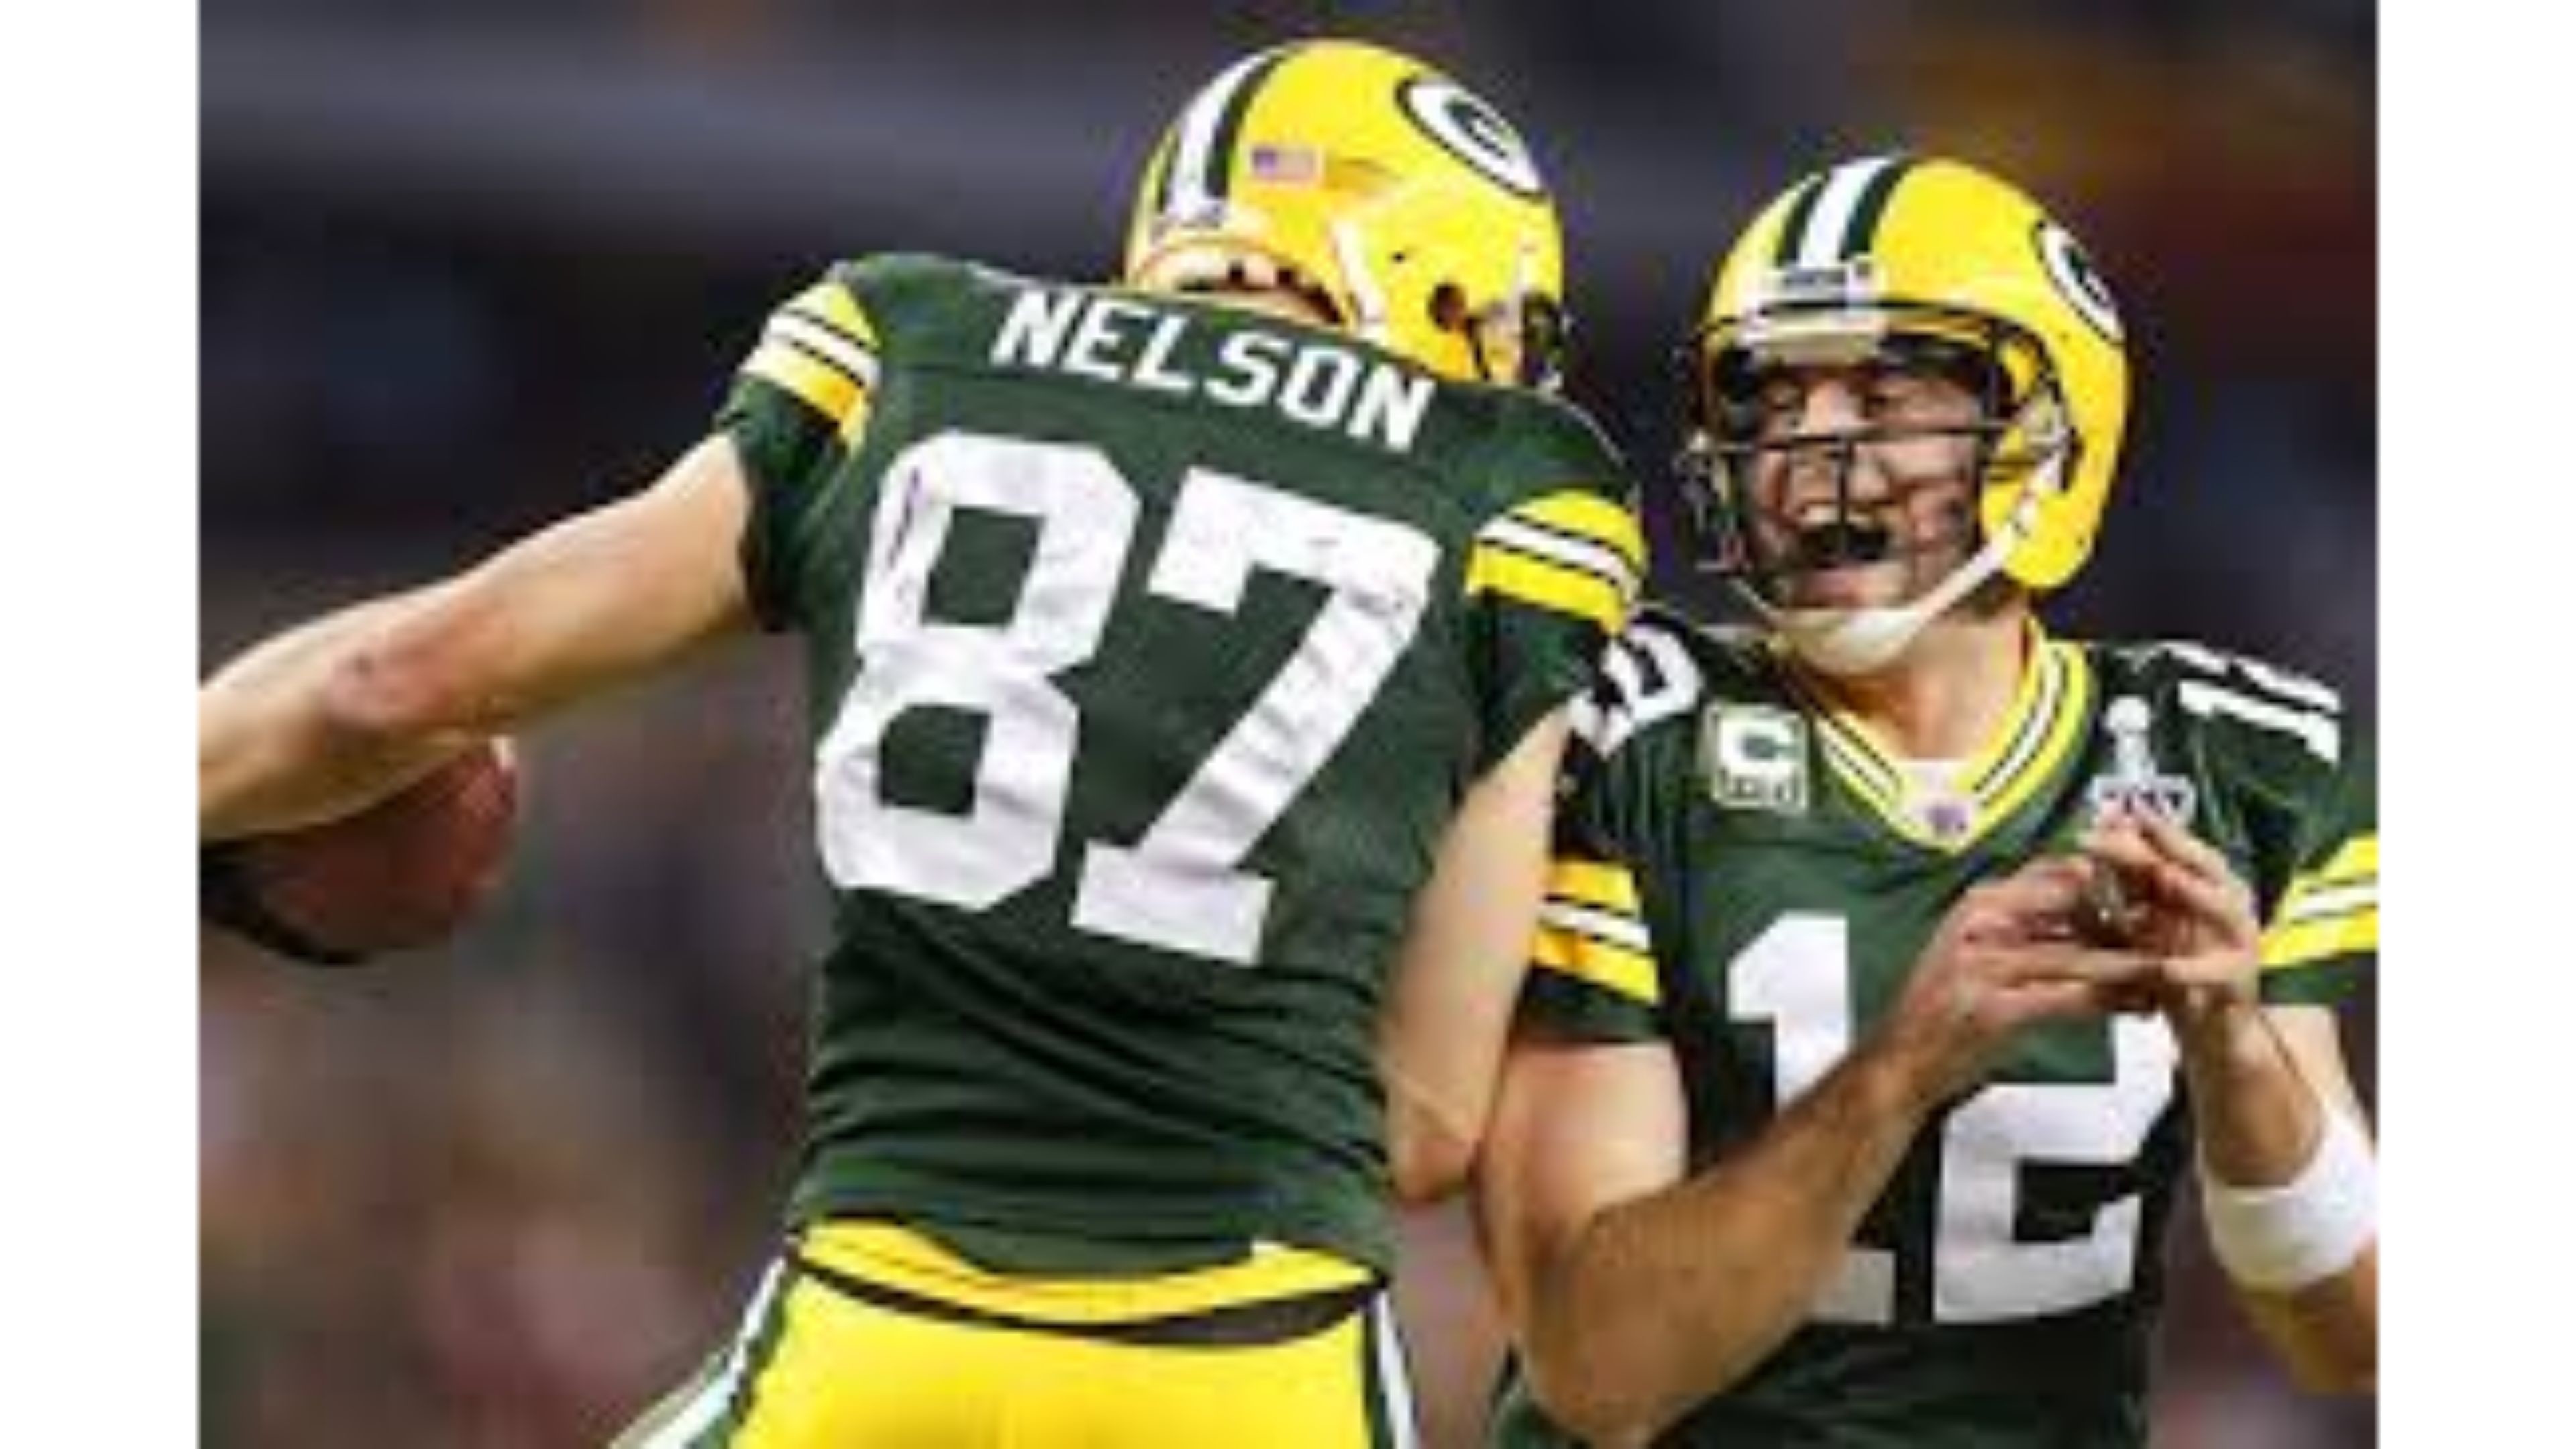 3840x2160 Jordy Nelson and 4K Aaron Rodgers Wallpapers